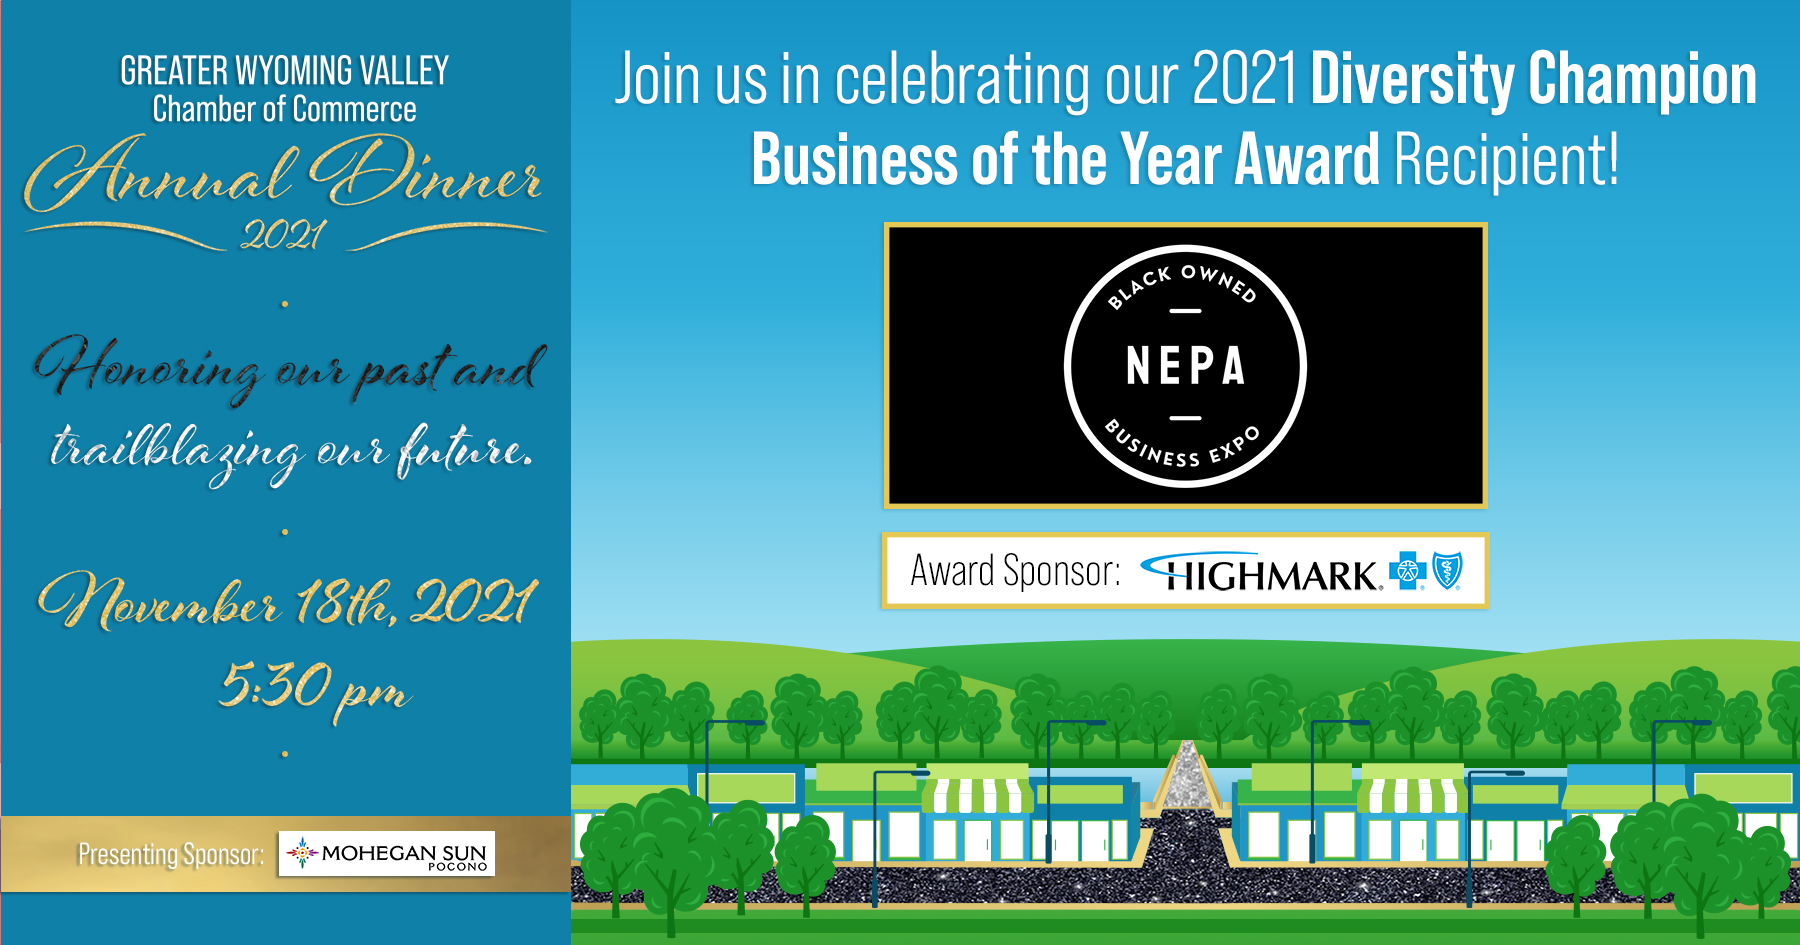 Image for Meet Our 2021 Diversity Champion Business of the Year Award Recipient: NEPA's 1st Annual Black Owned Business Expo!